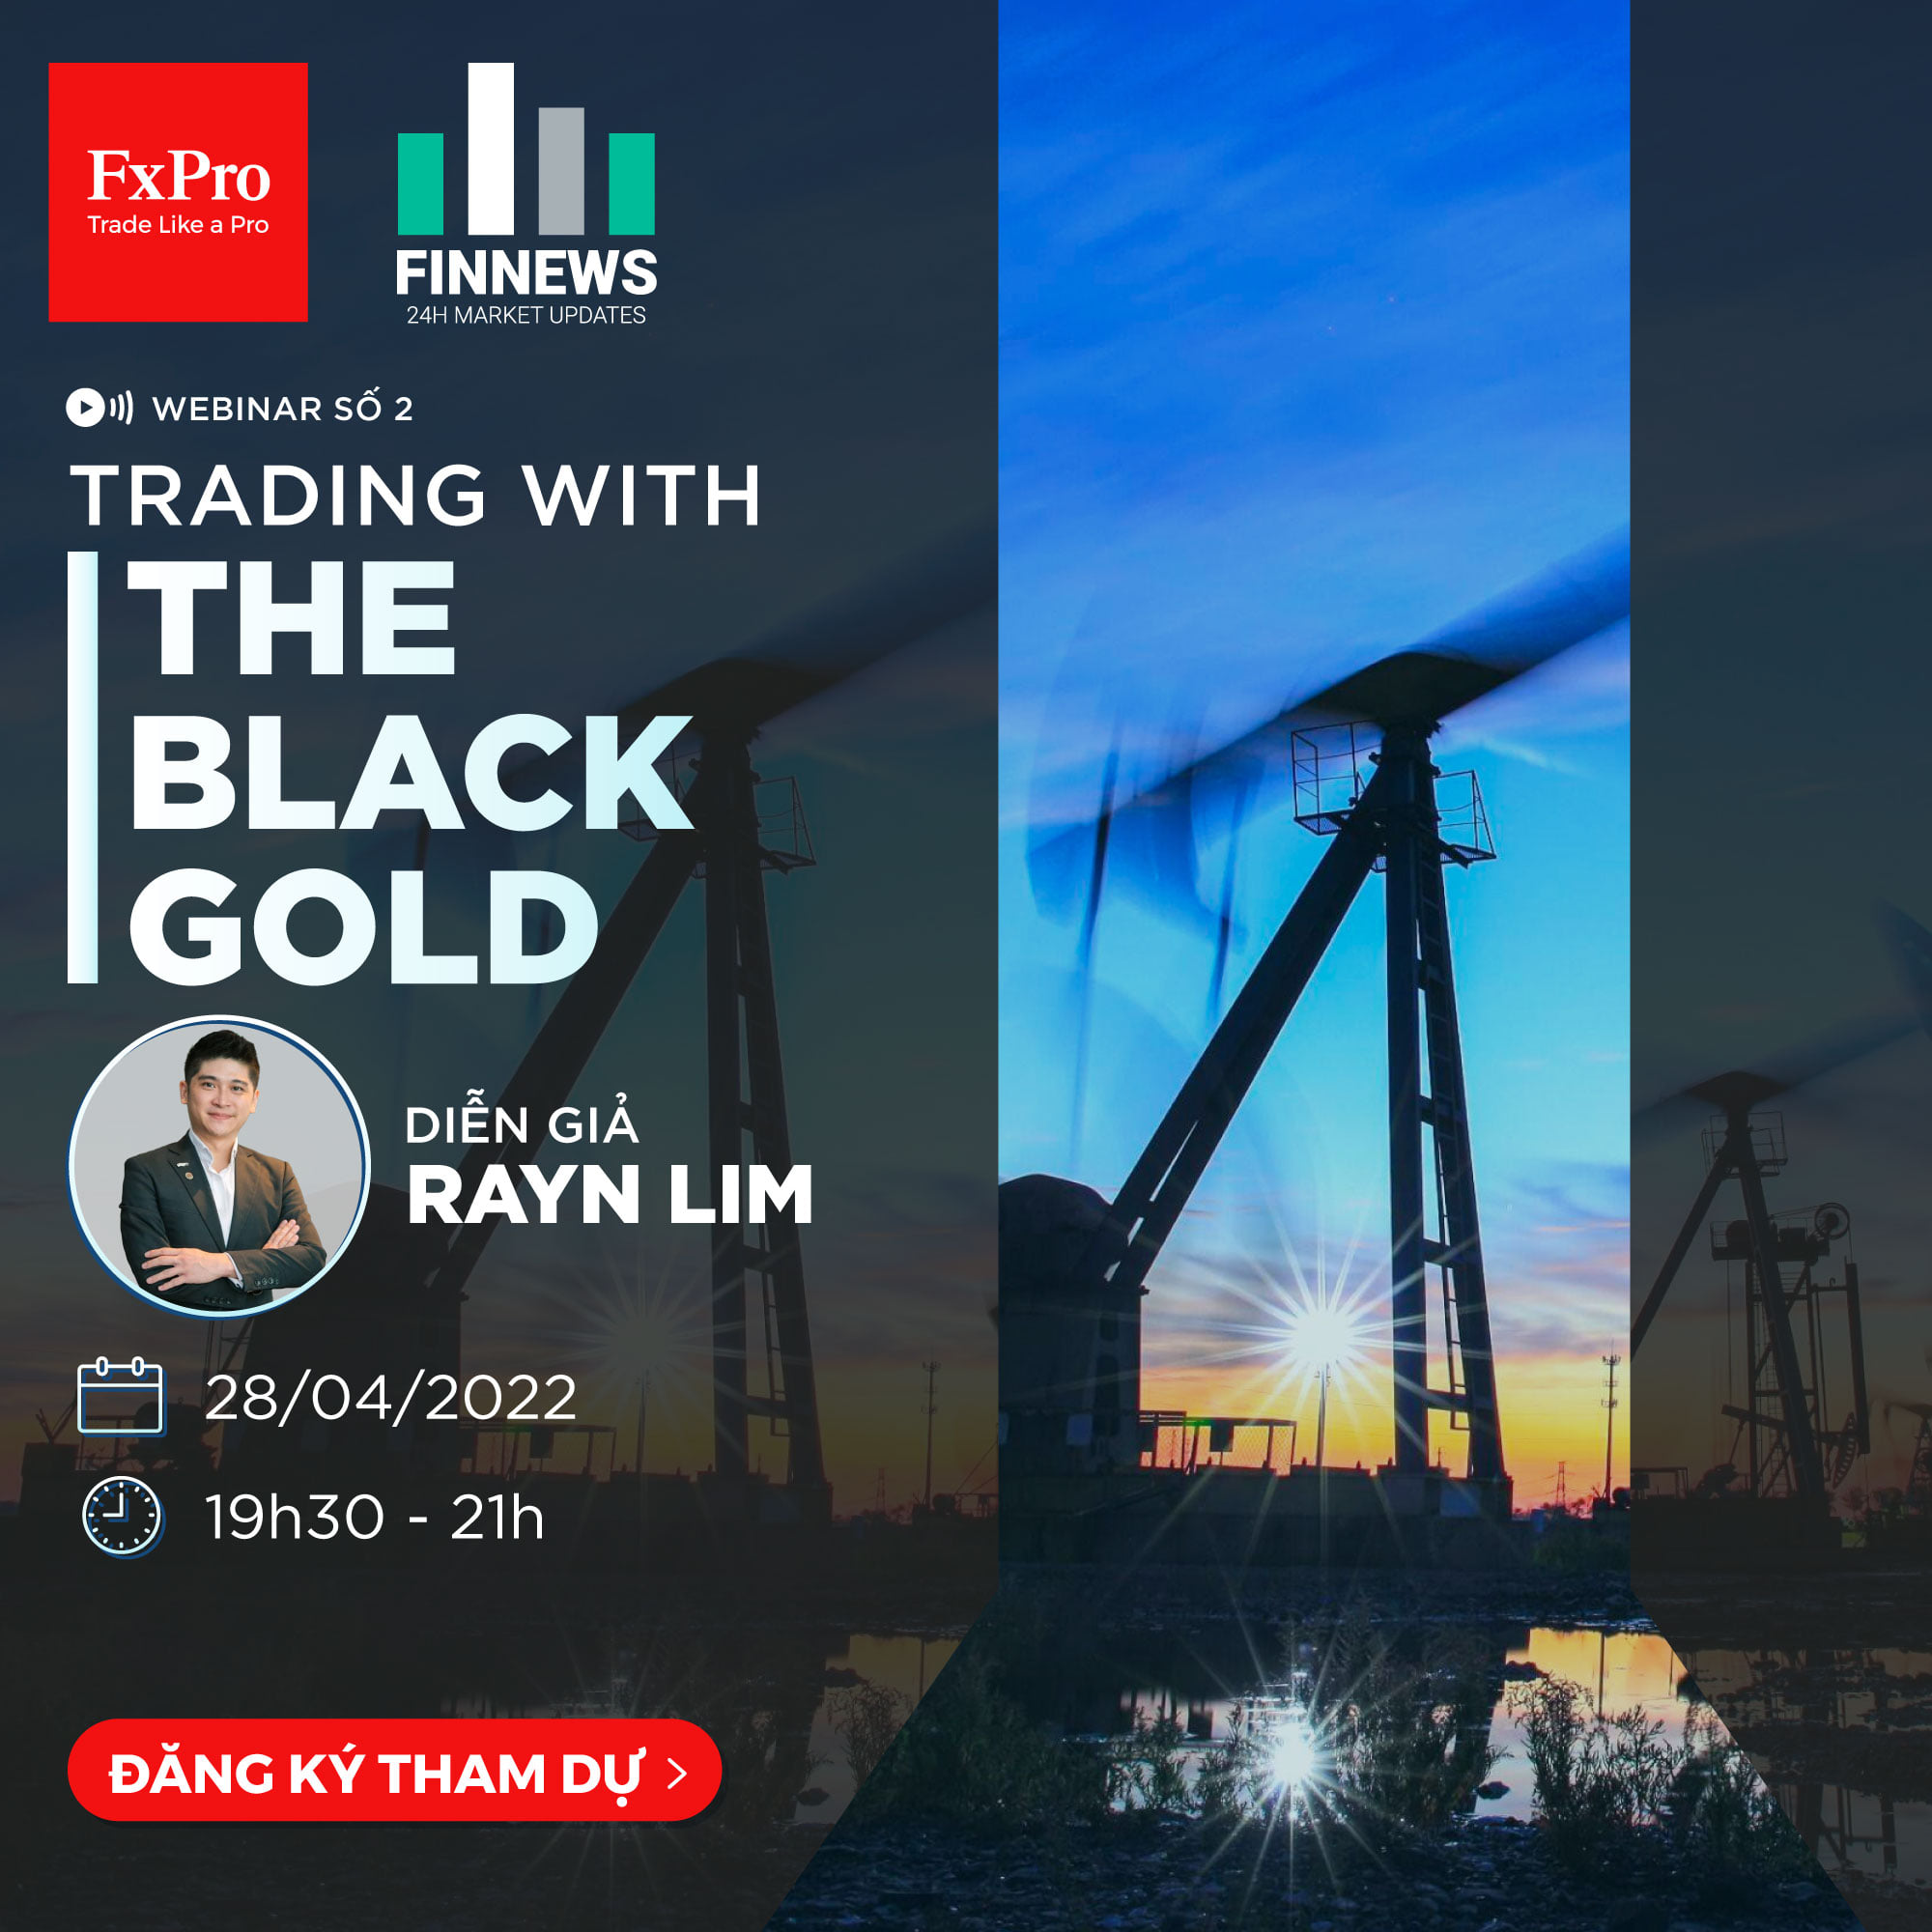 Finnews Webinar 28/04/2022: Trading With The Black Gold